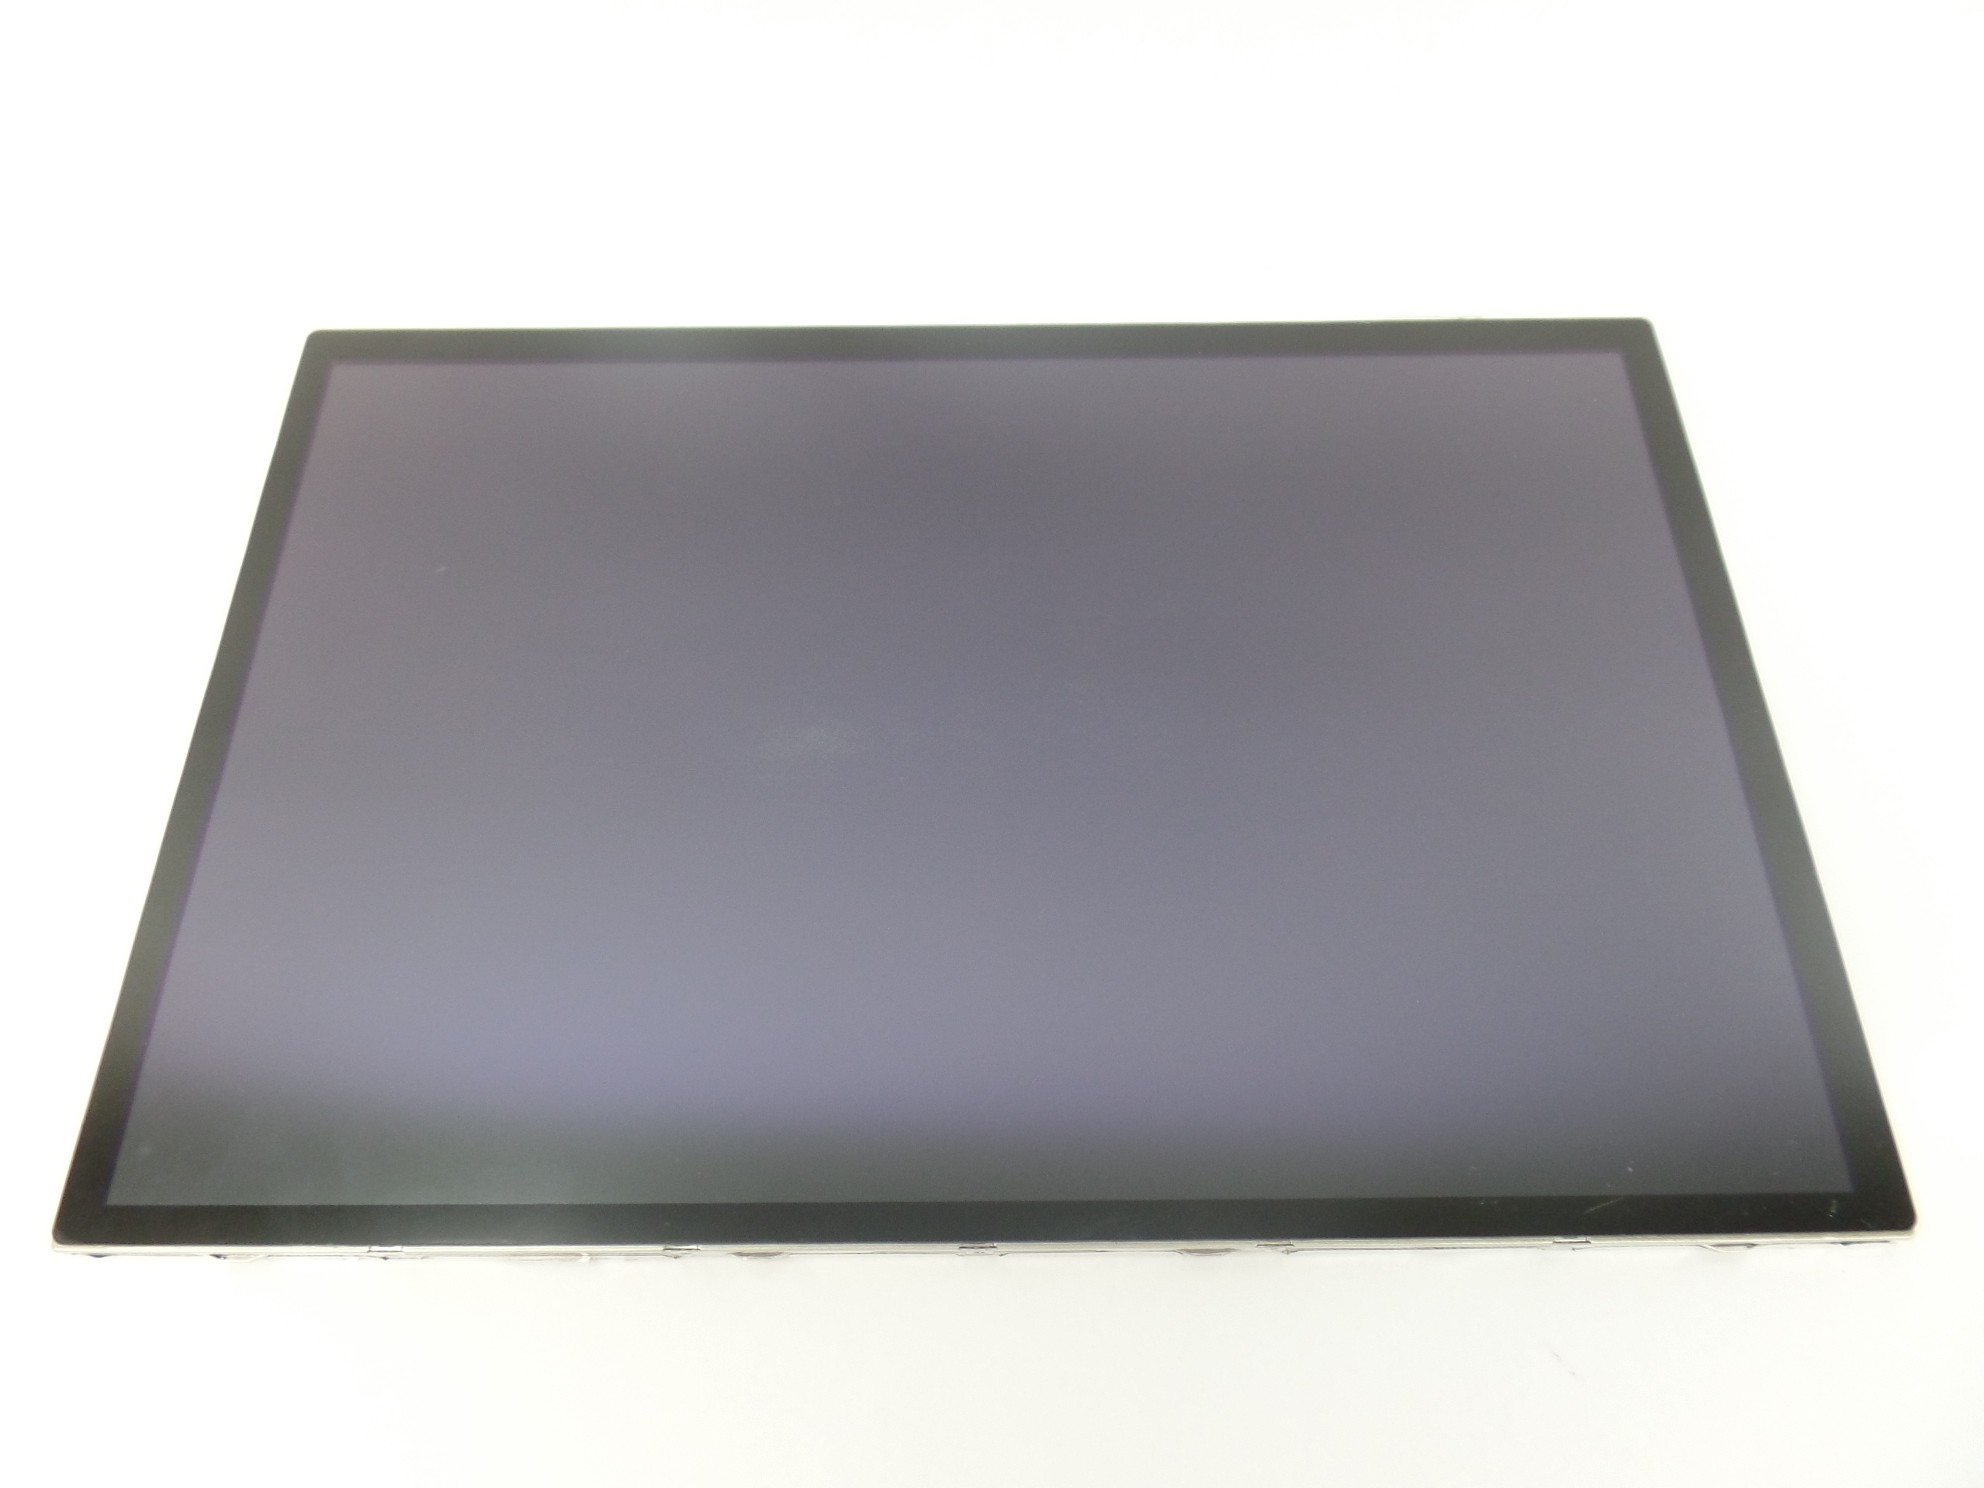 12.1" Touchscreen LCD SU5C-12W35AS-01X for Elitebook 2760P